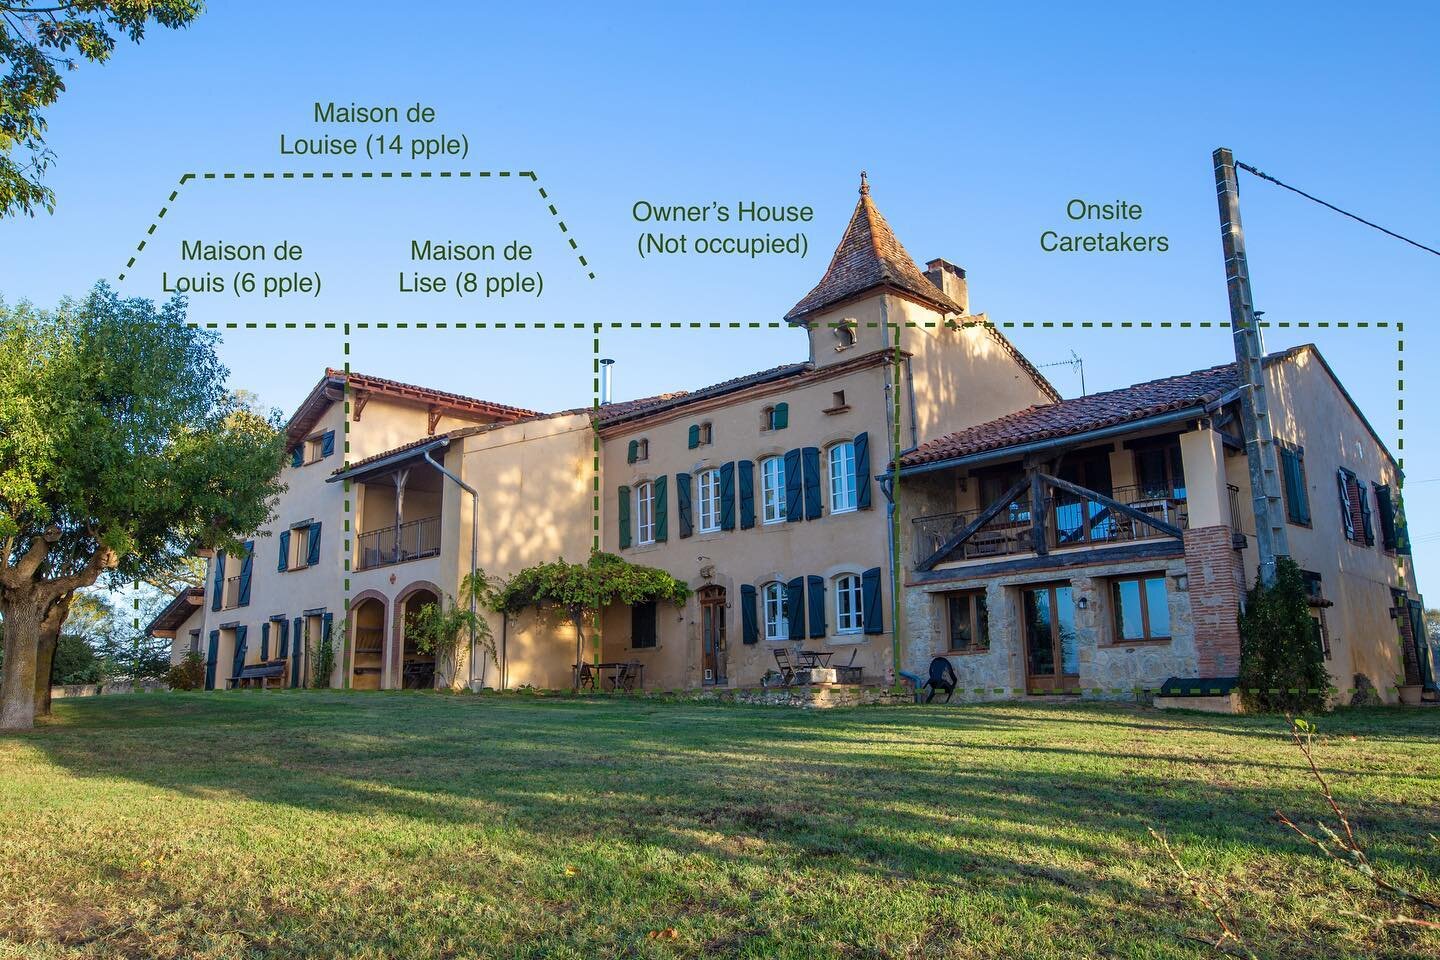 To better understand the domain, we made this chart! We can currently host up to 14 people at Le Domaine de Manzac.

#manzac #domainedemanzac